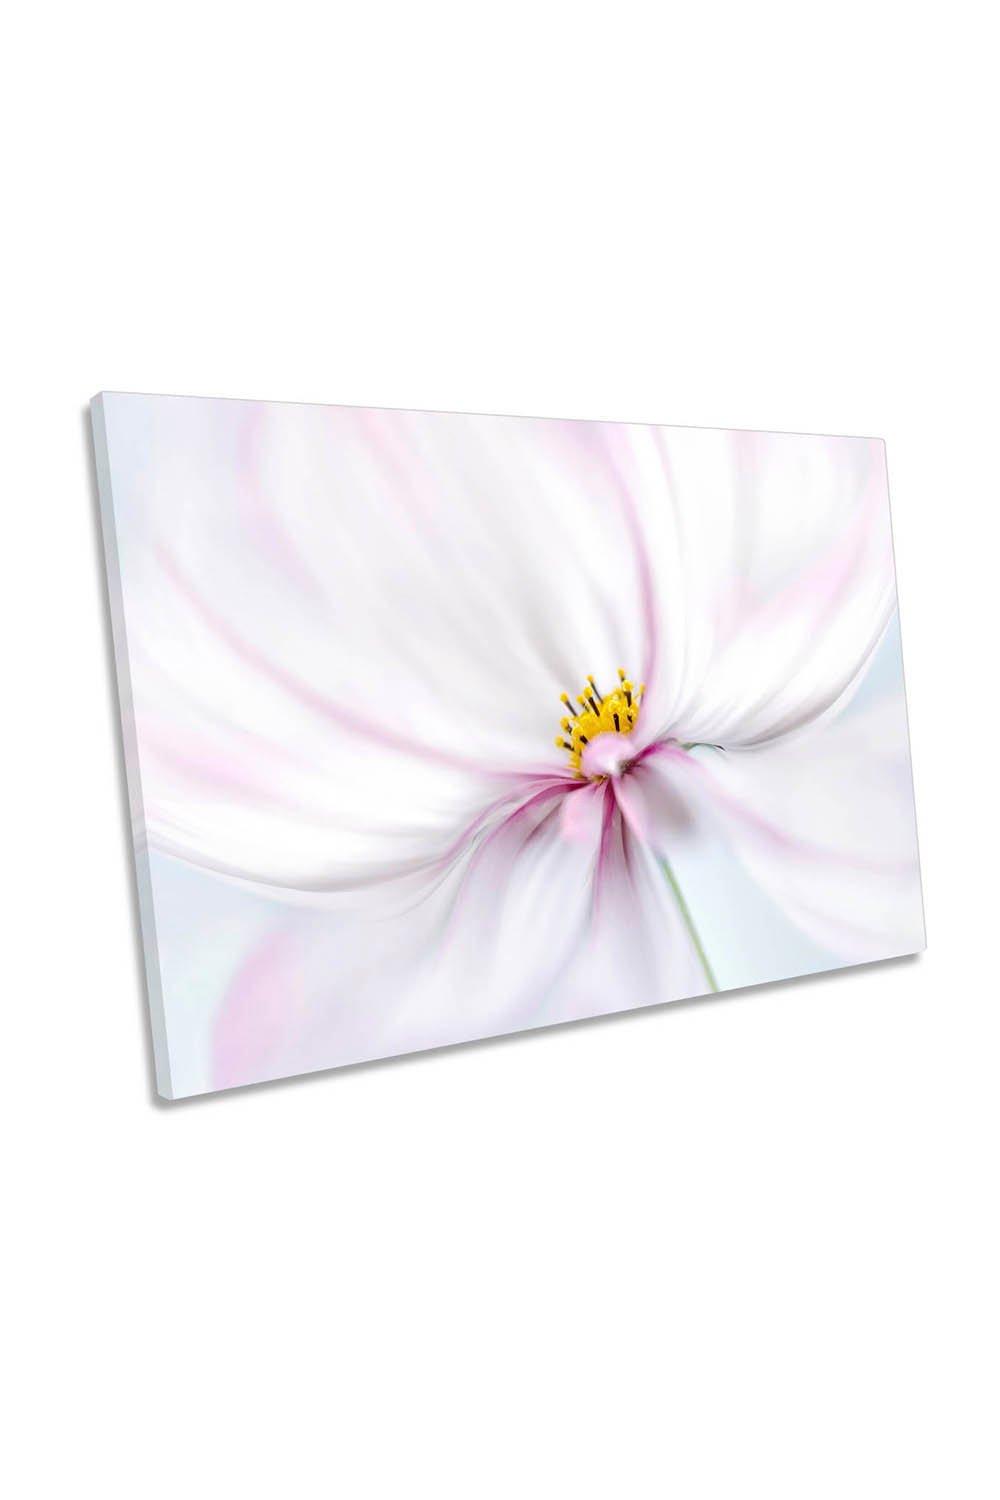 Cosmos Soft Pink Flower Floral Canvas Wall Art Picture Print